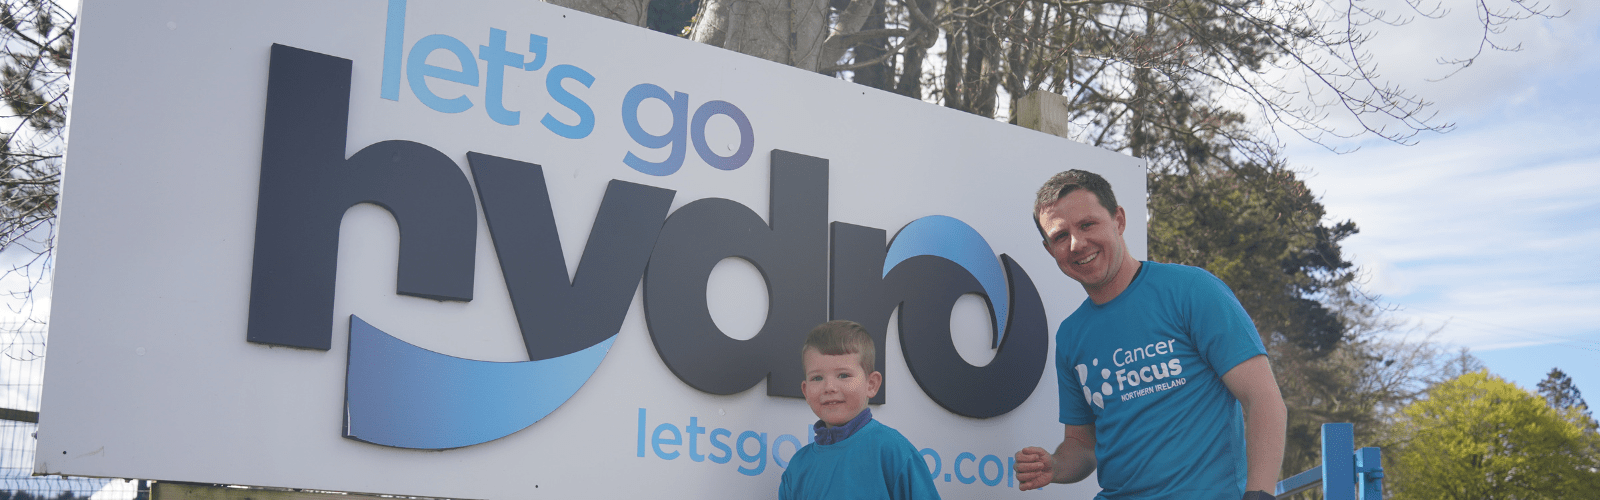 Dad’s Dash and Splash at Let’s Go Hydro